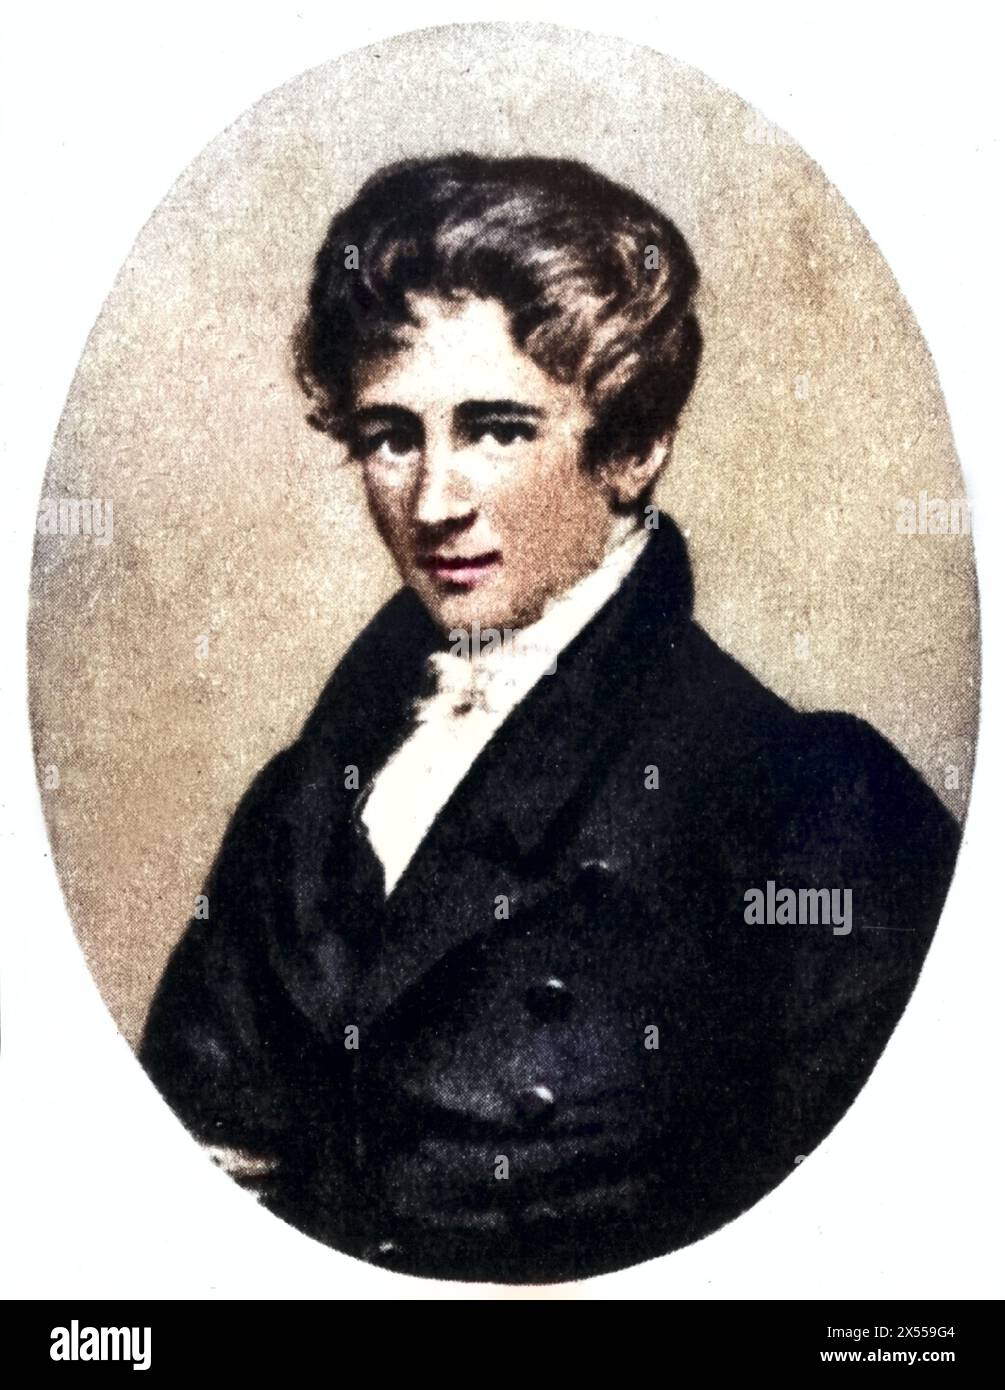 Abel, Niels Henrik, 5.8.1802 - 6.4.1829, Norwain scientist (mathematician), portrait, 19th century, ADDITIONAL-RIGHTS-CLEARANCE-INFO-NOT-AVAILABLE Stock Photo